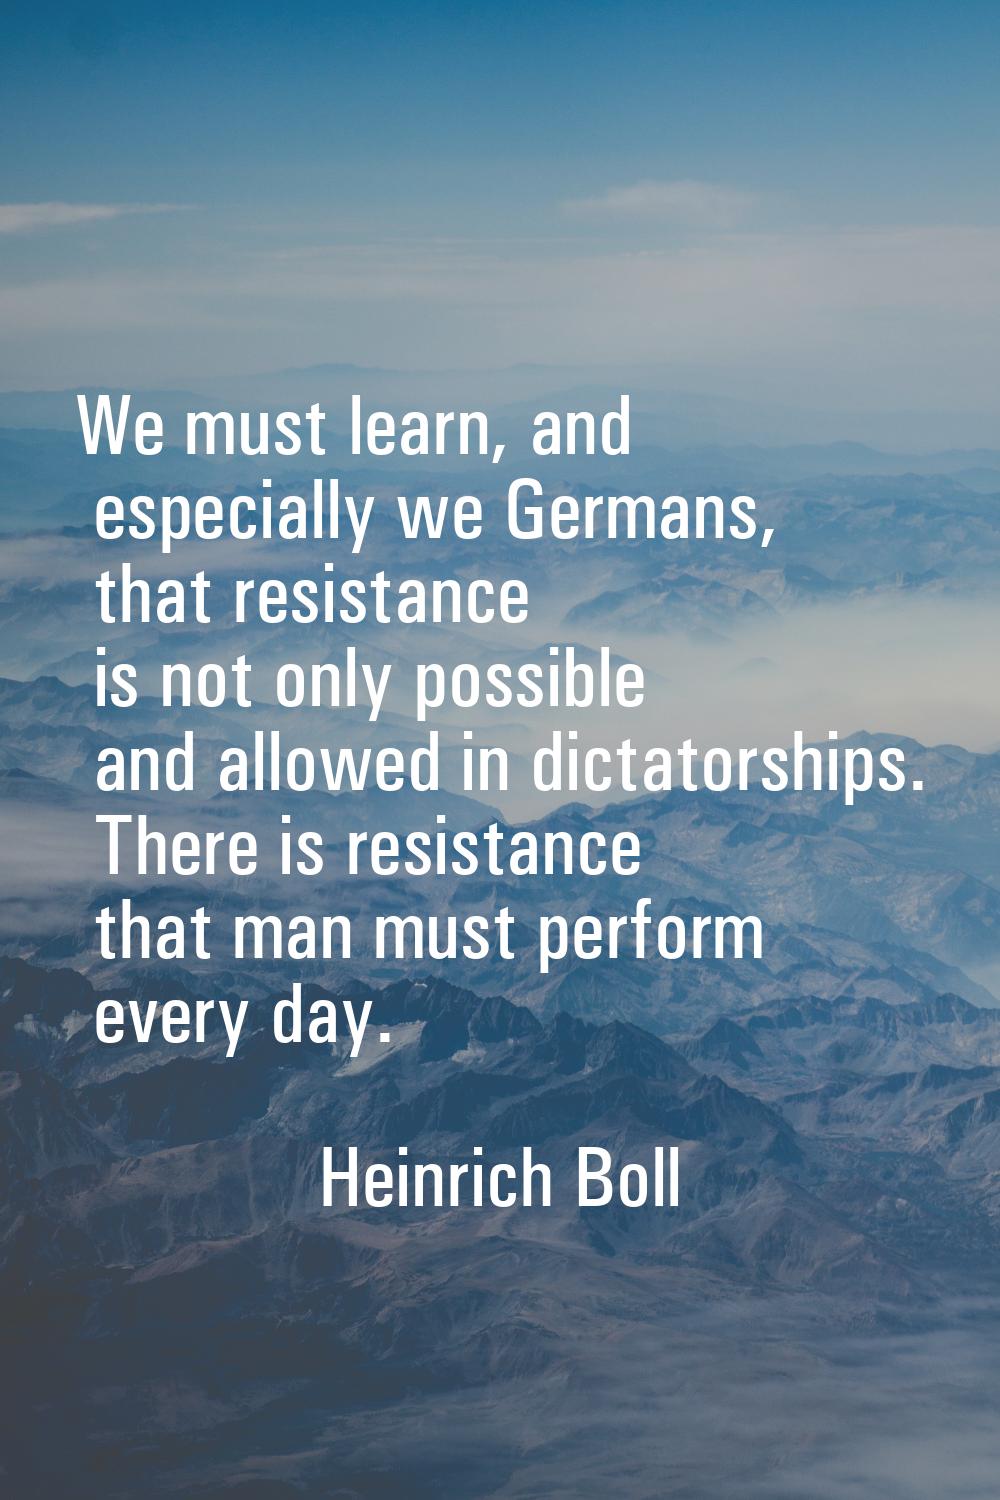 We must learn, and especially we Germans, that resistance is not only possible and allowed in dicta